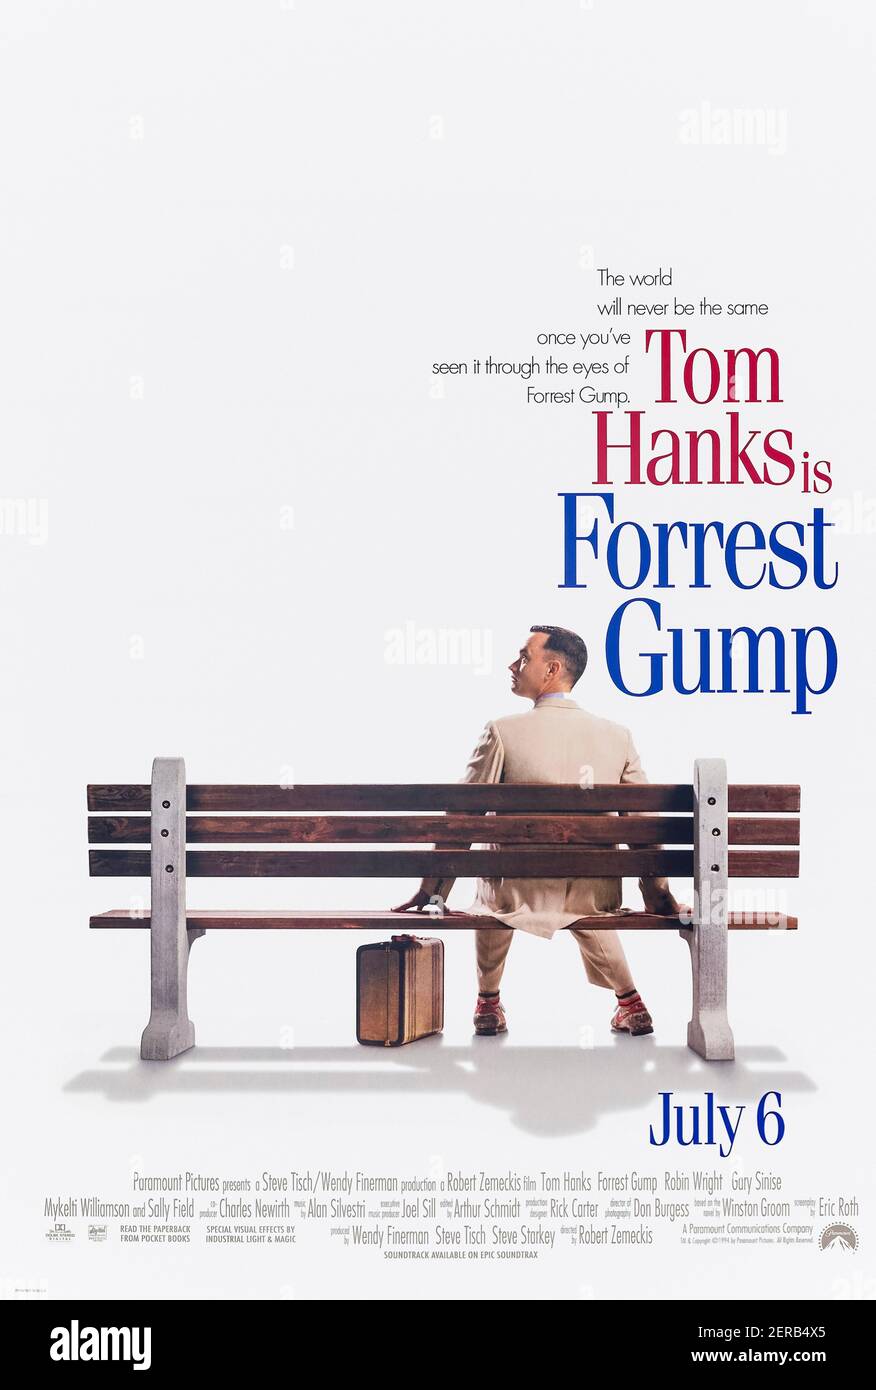 Forrest Gump (1994) directed by Robert Zemeckis and starring Tom Hanks, Robin Wright and Gary Sinise. Adaptation of Winston Groom's novel about a man with an IQ of 75 who takes part in defining historical events in modern American history and has a remarkable life. Stock Photo